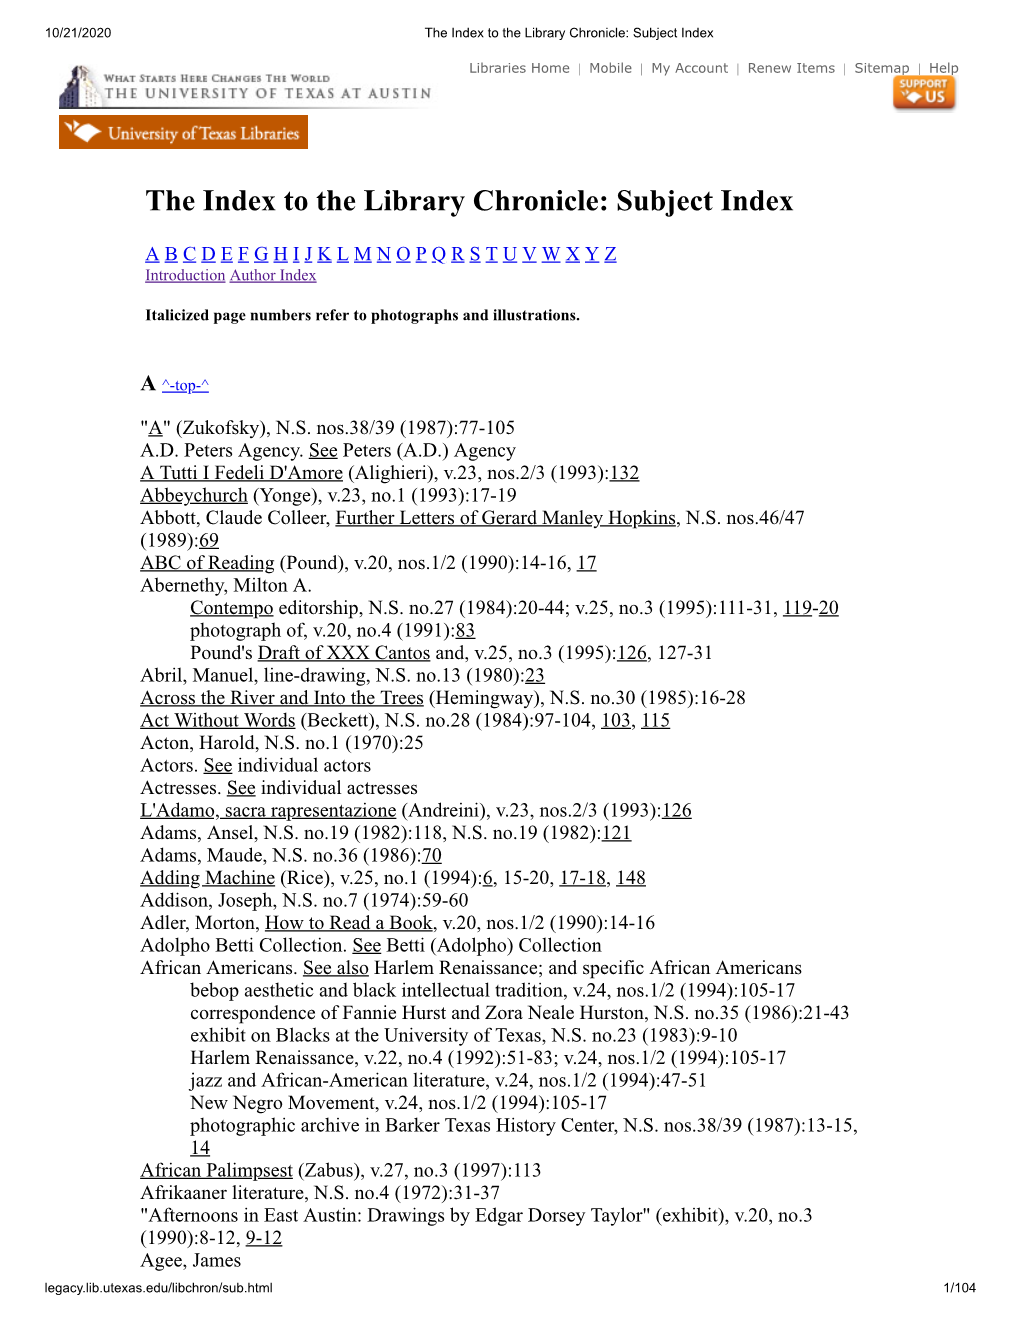 The Index to the Library Chronicle: Subject Index